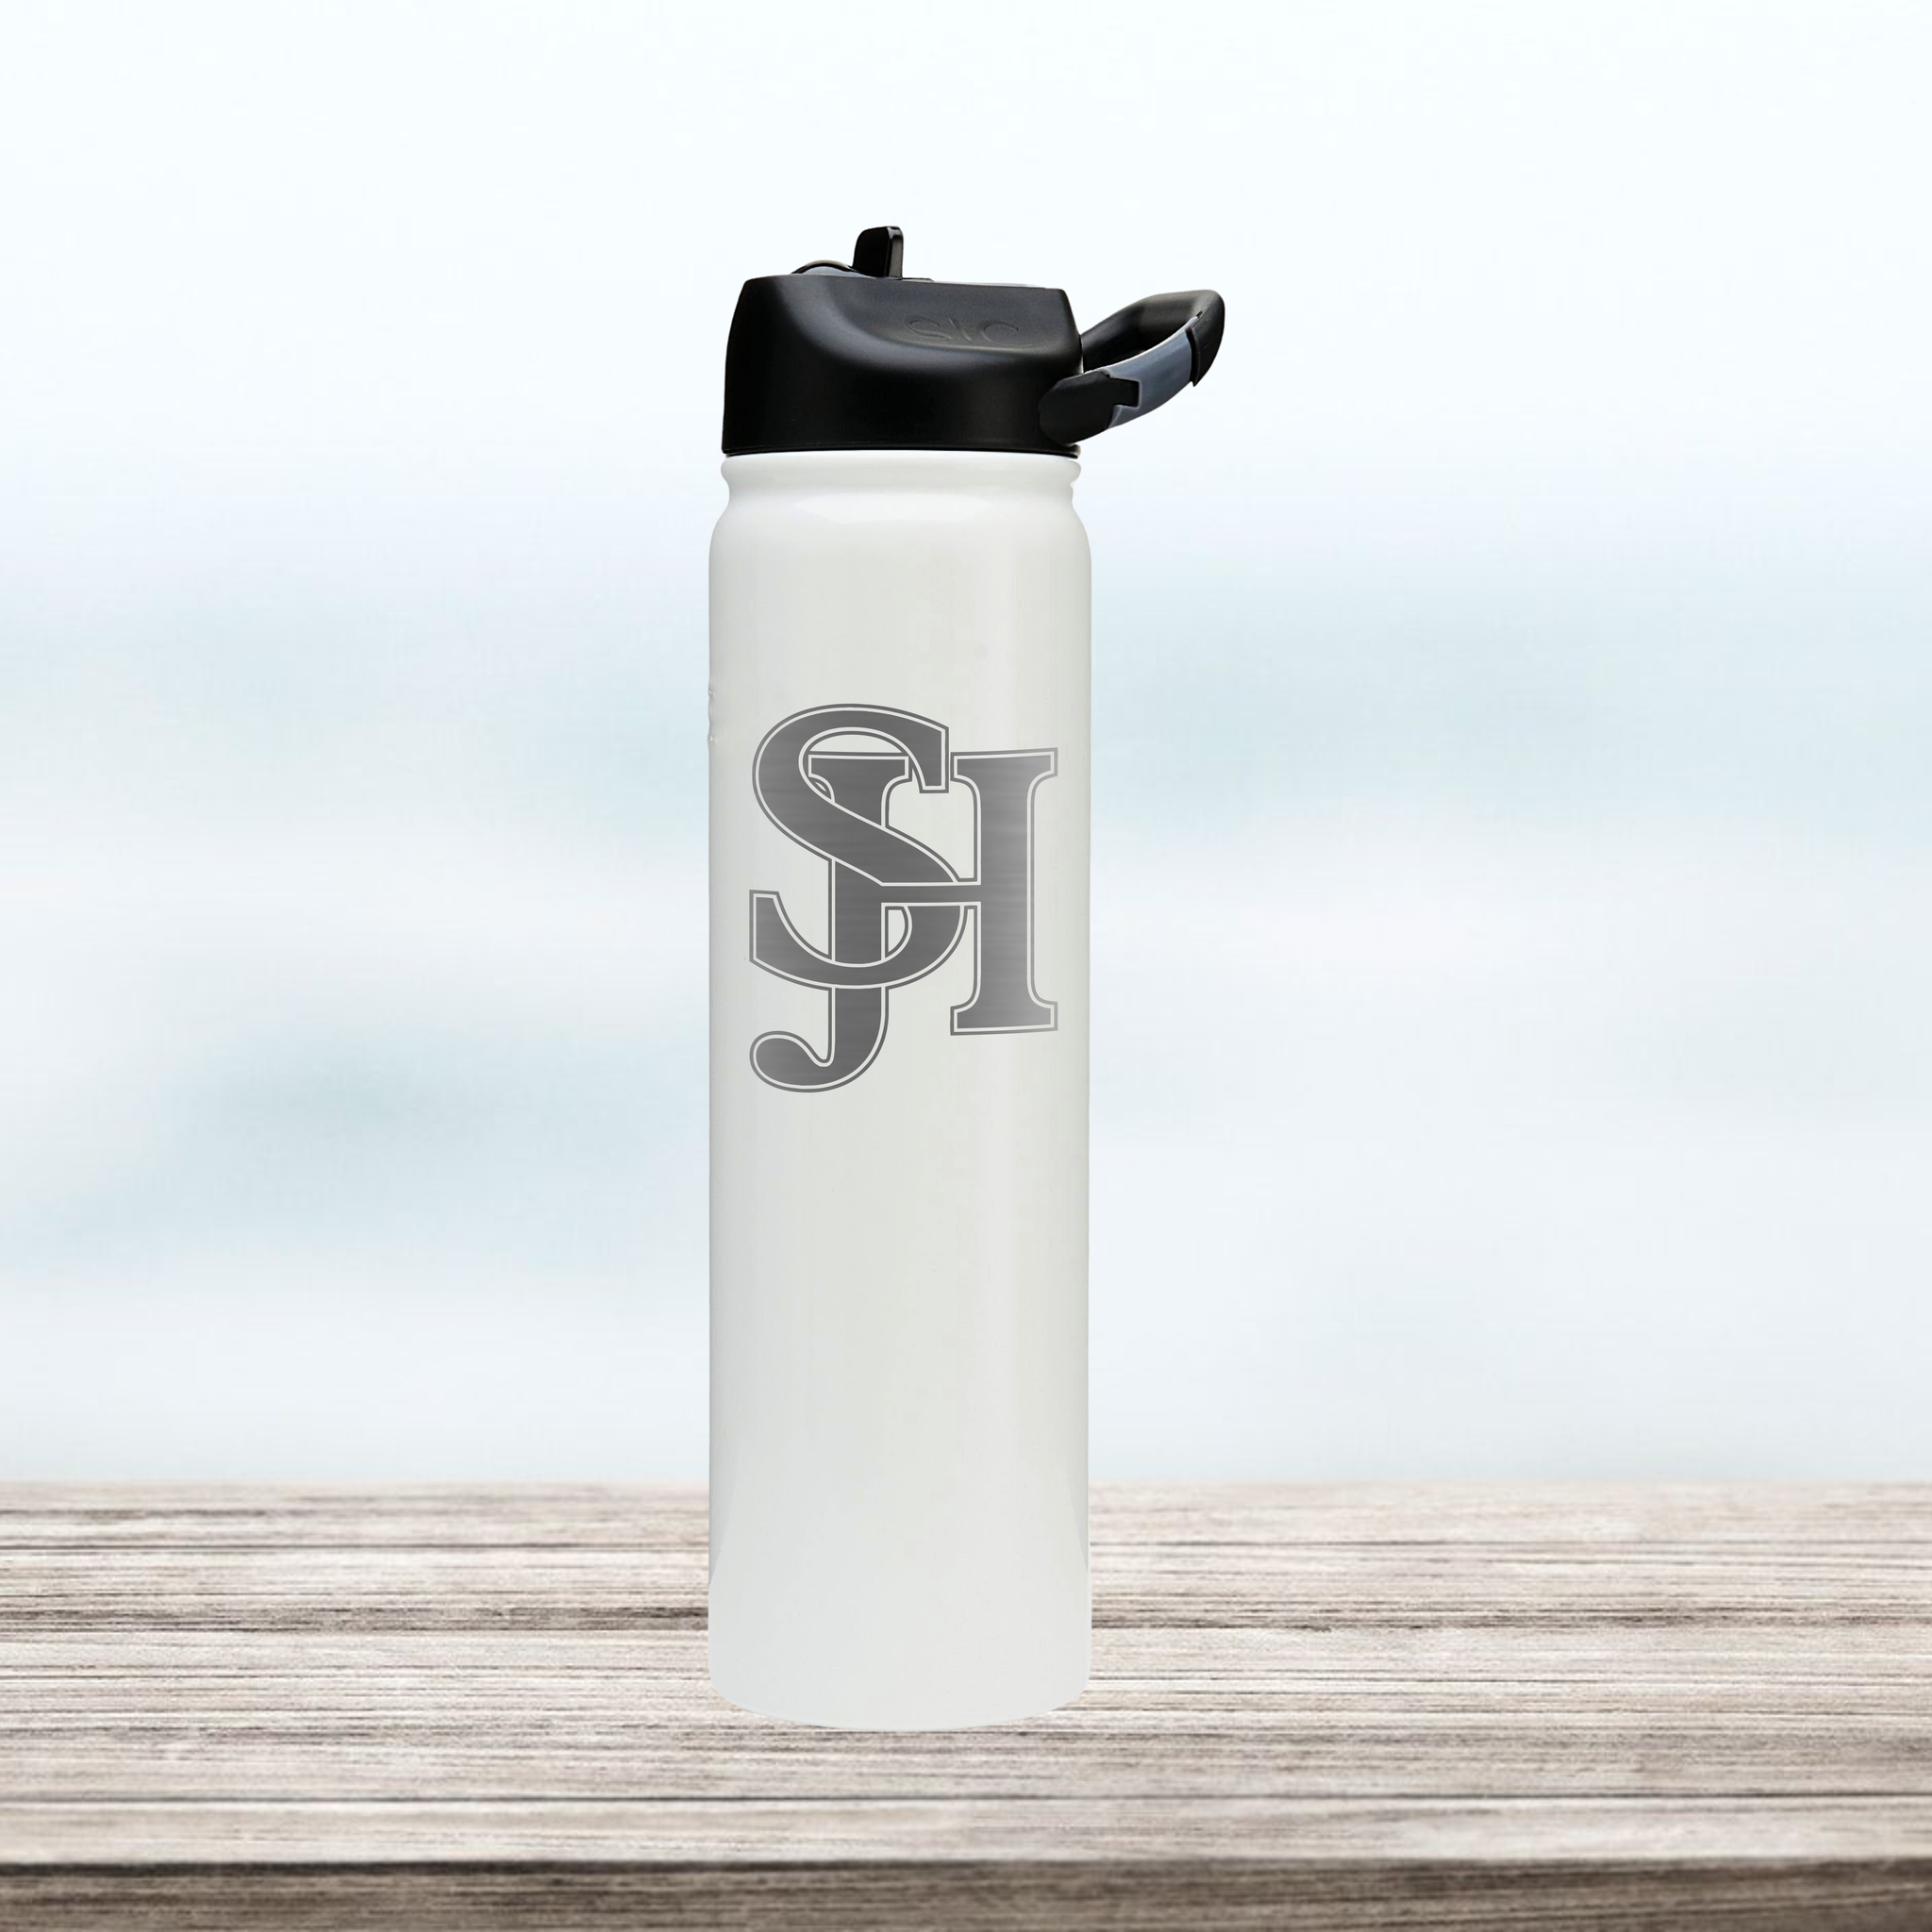 Monogram  Engraved 27 oz Stainless Steel Double-Walled Sports